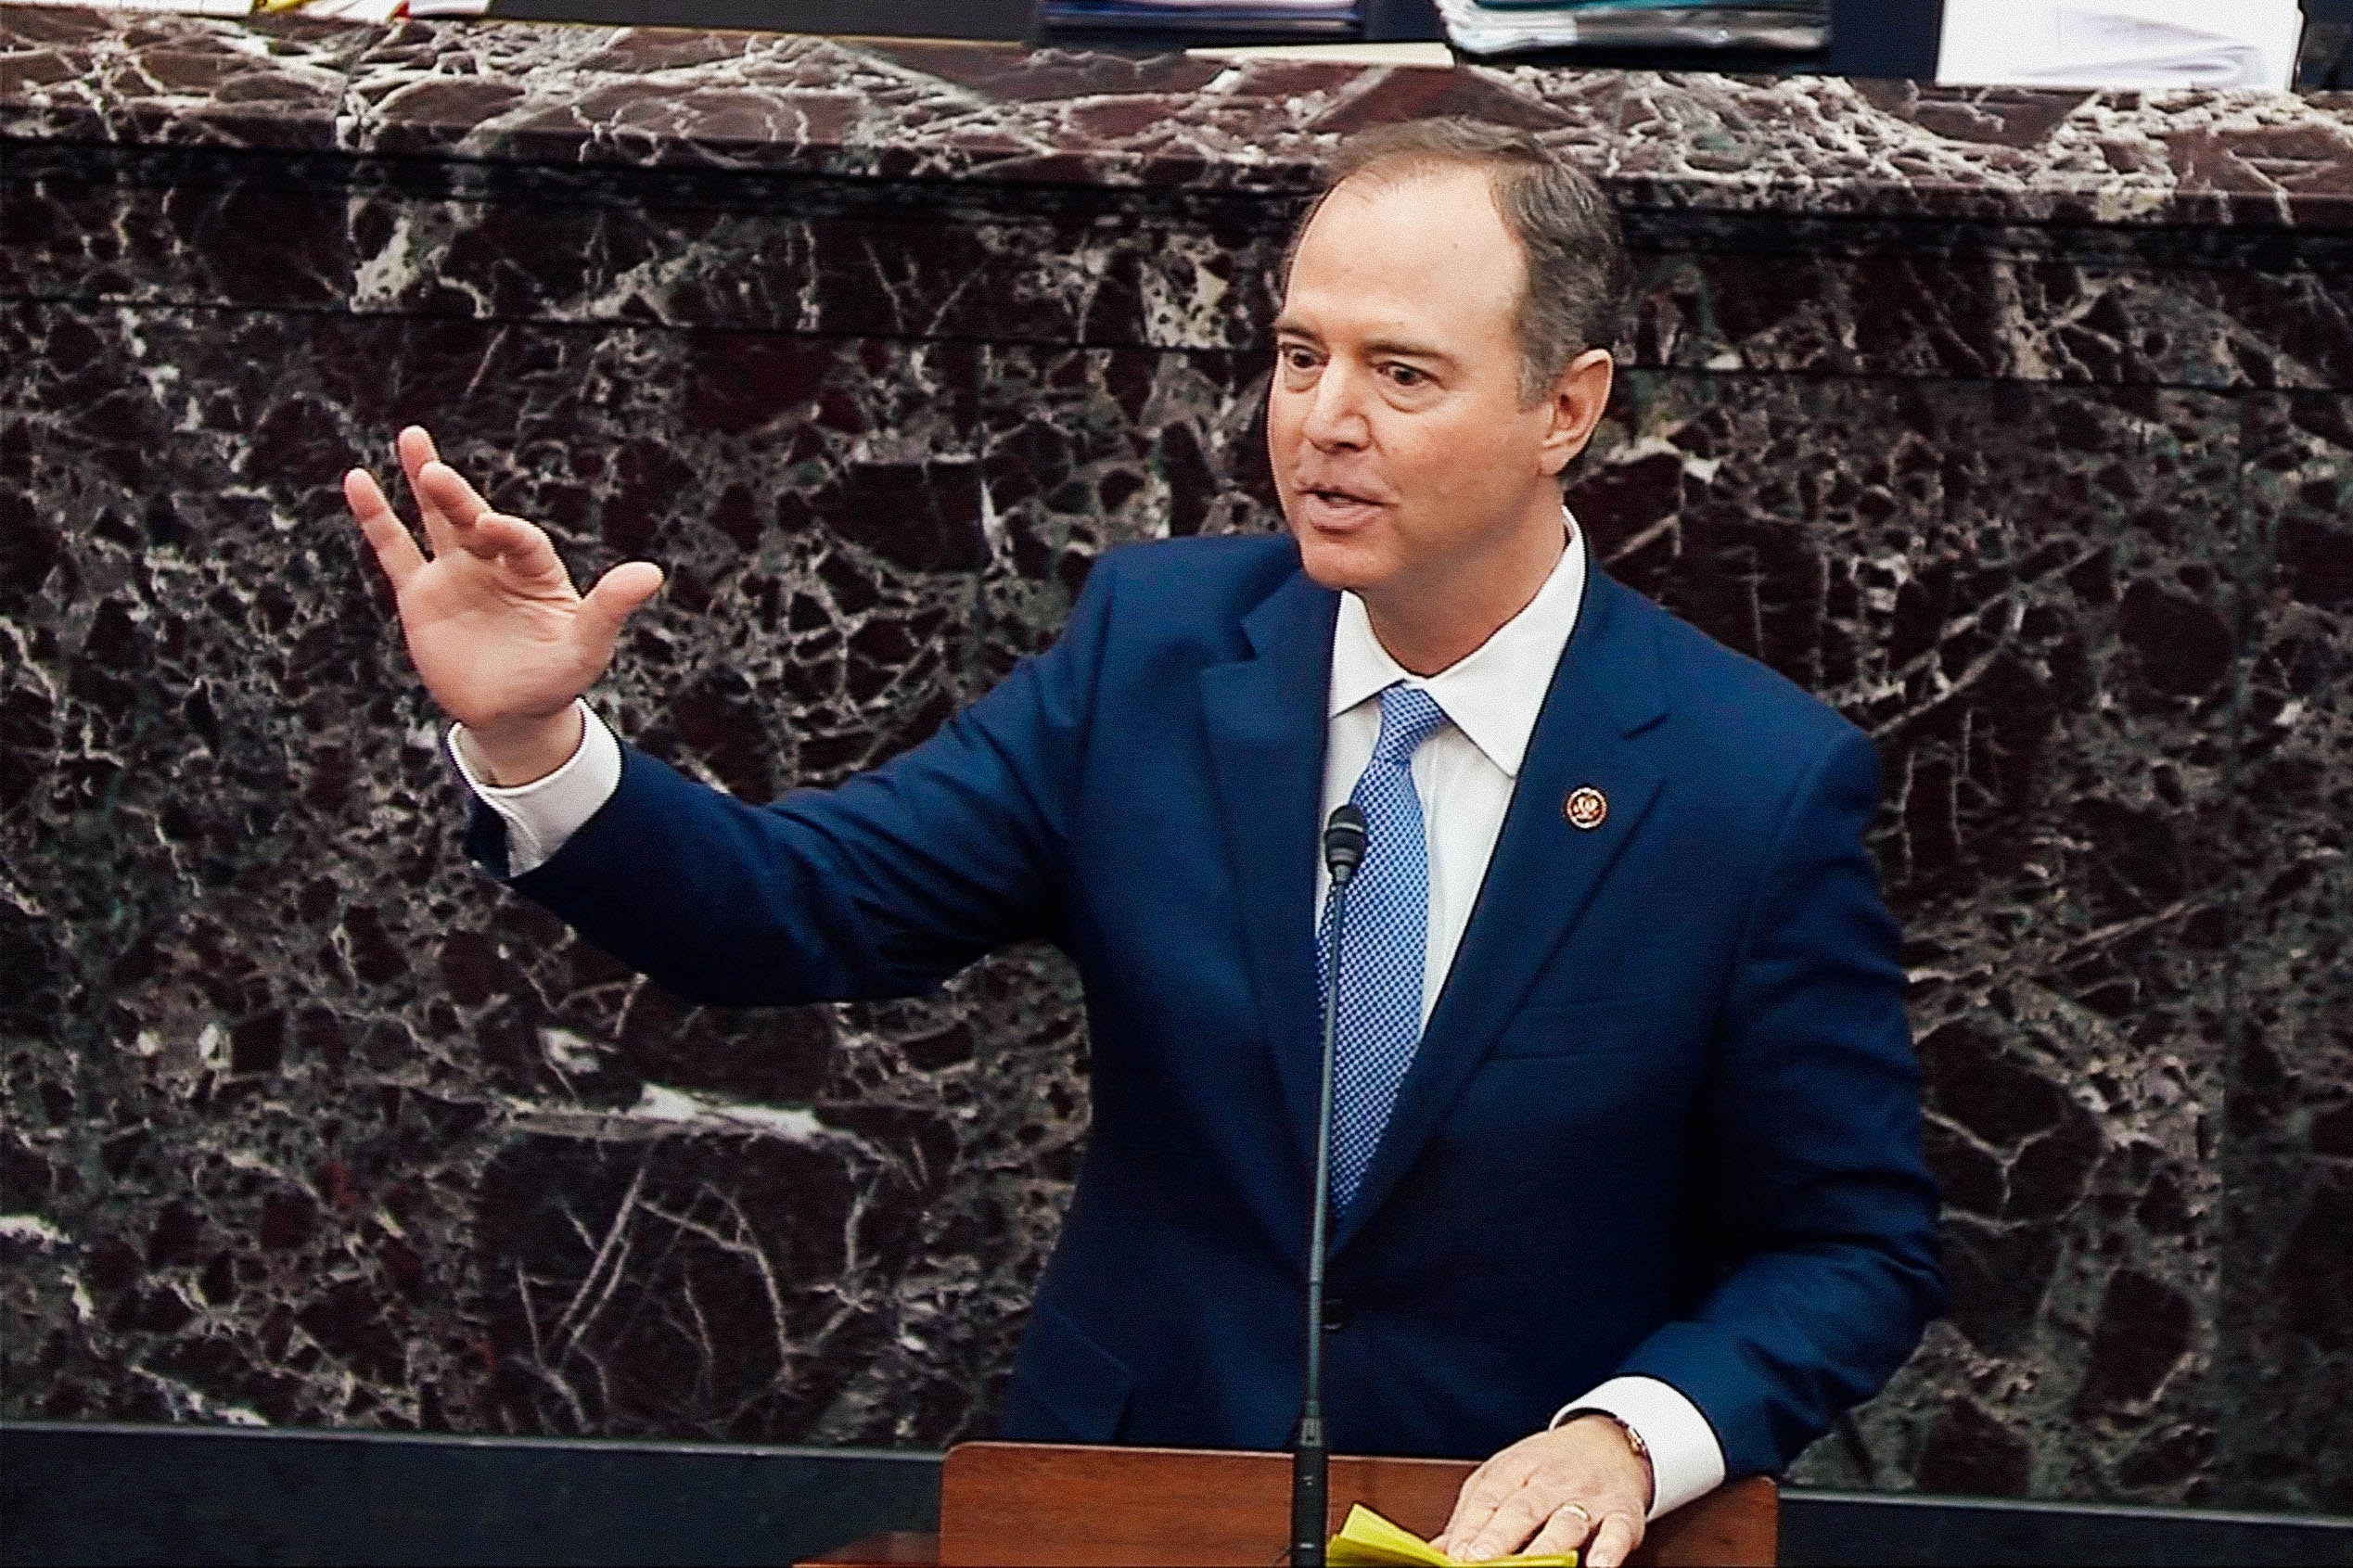 Adam Schiff raises his hand while speaking at a lectern